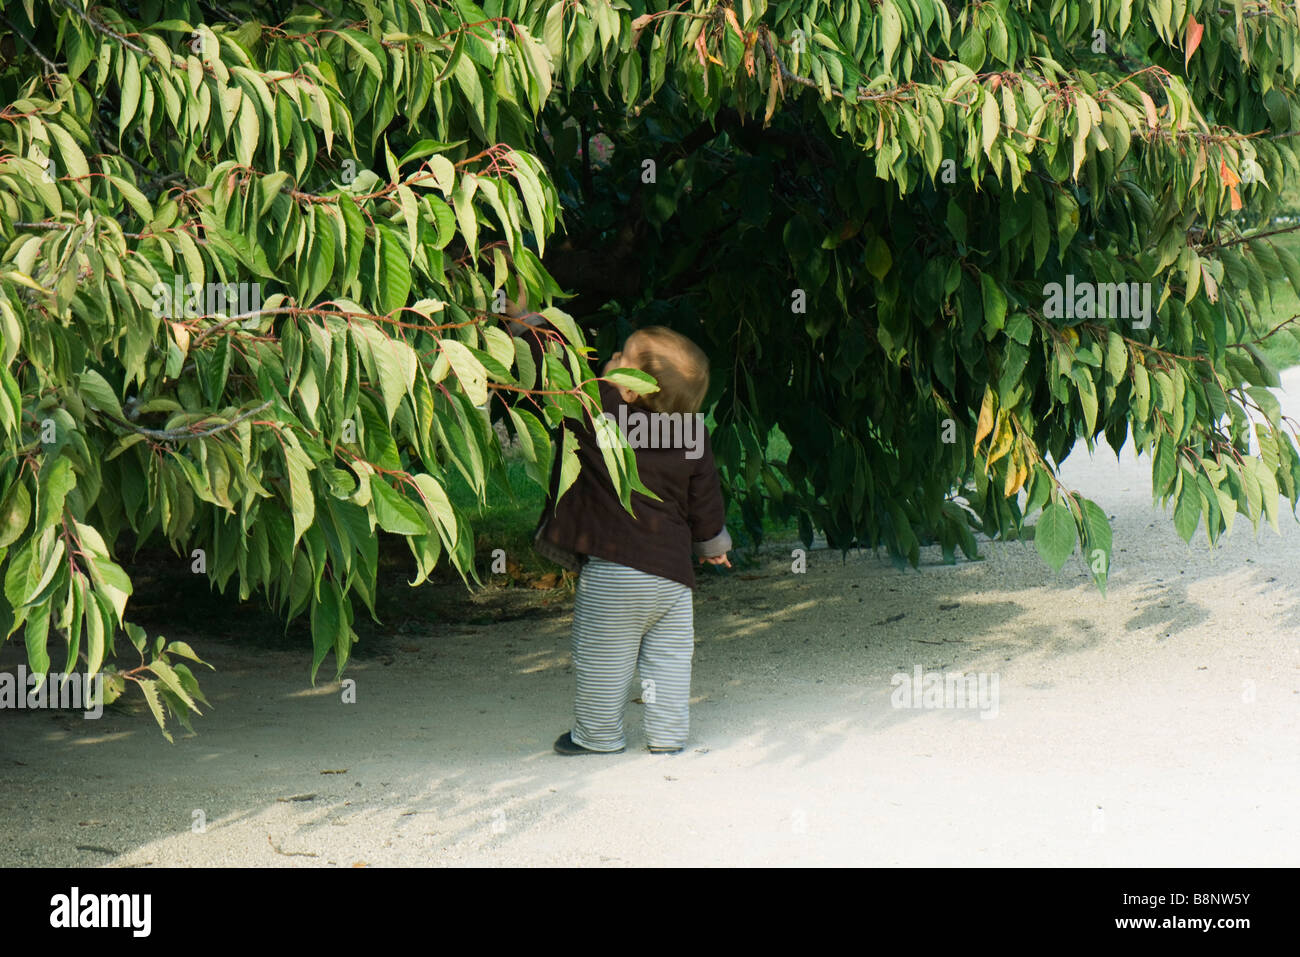 Toddler standing under tree, rear view Stock Photo